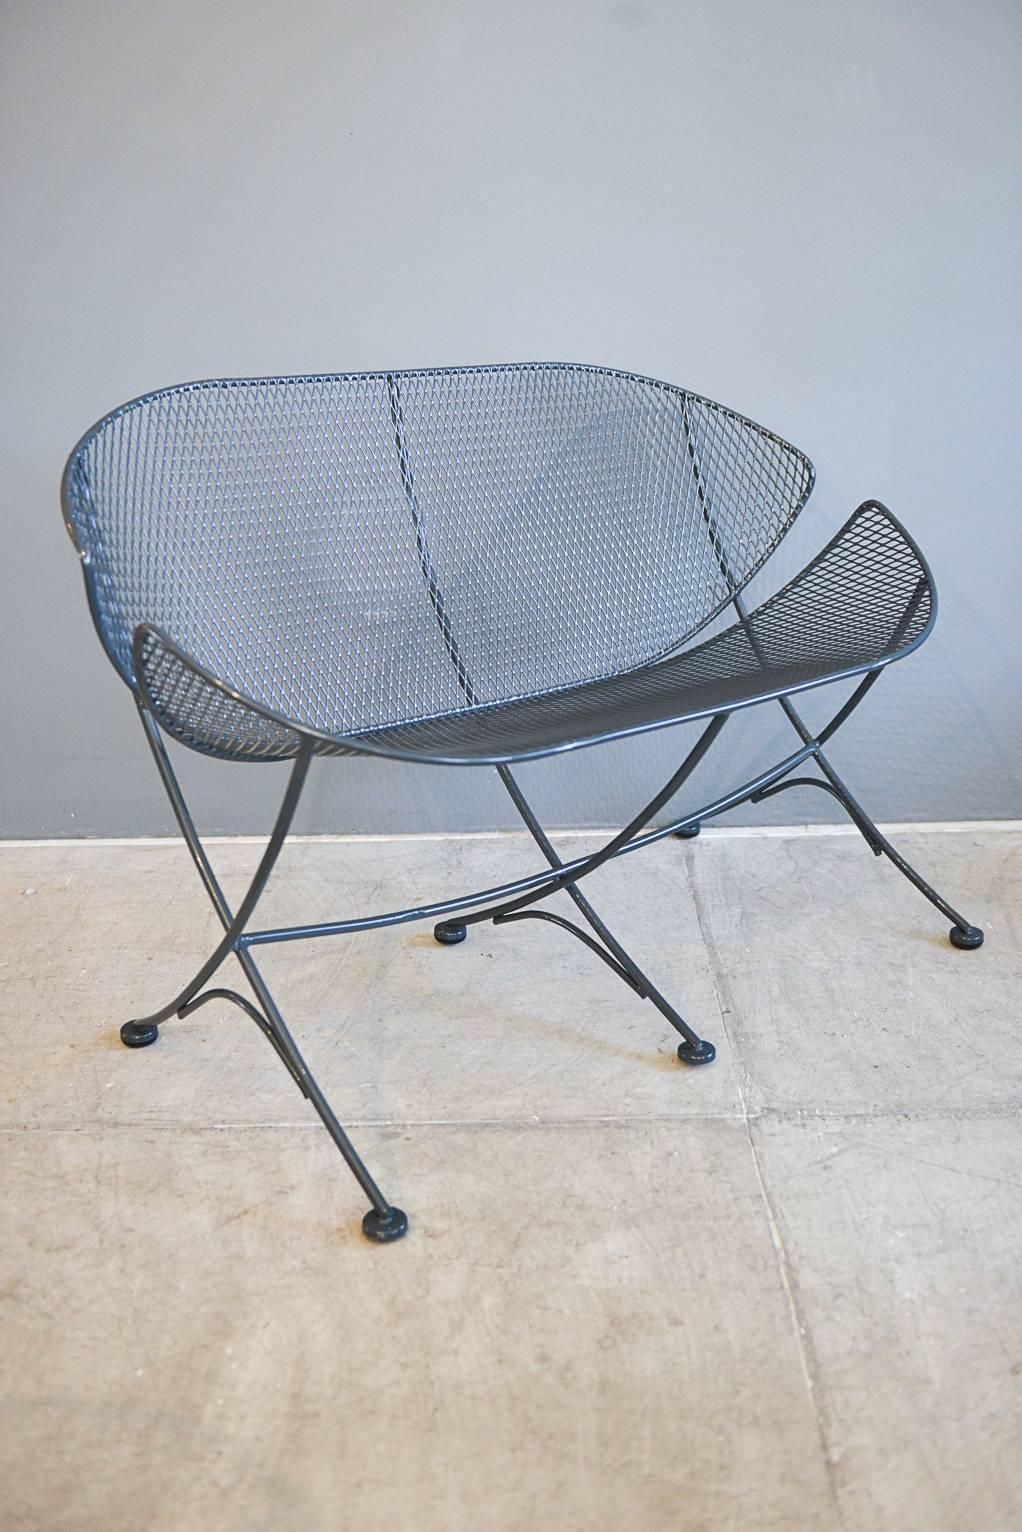 Maurizio Tempestini for Salterini Clamshell patio set. Woven mesh metal has been professionally powder coated and new floor protectors added. Beautiful charcoal grey color.

Set includes: Two chairs, one loveseat, one side table.

Settee